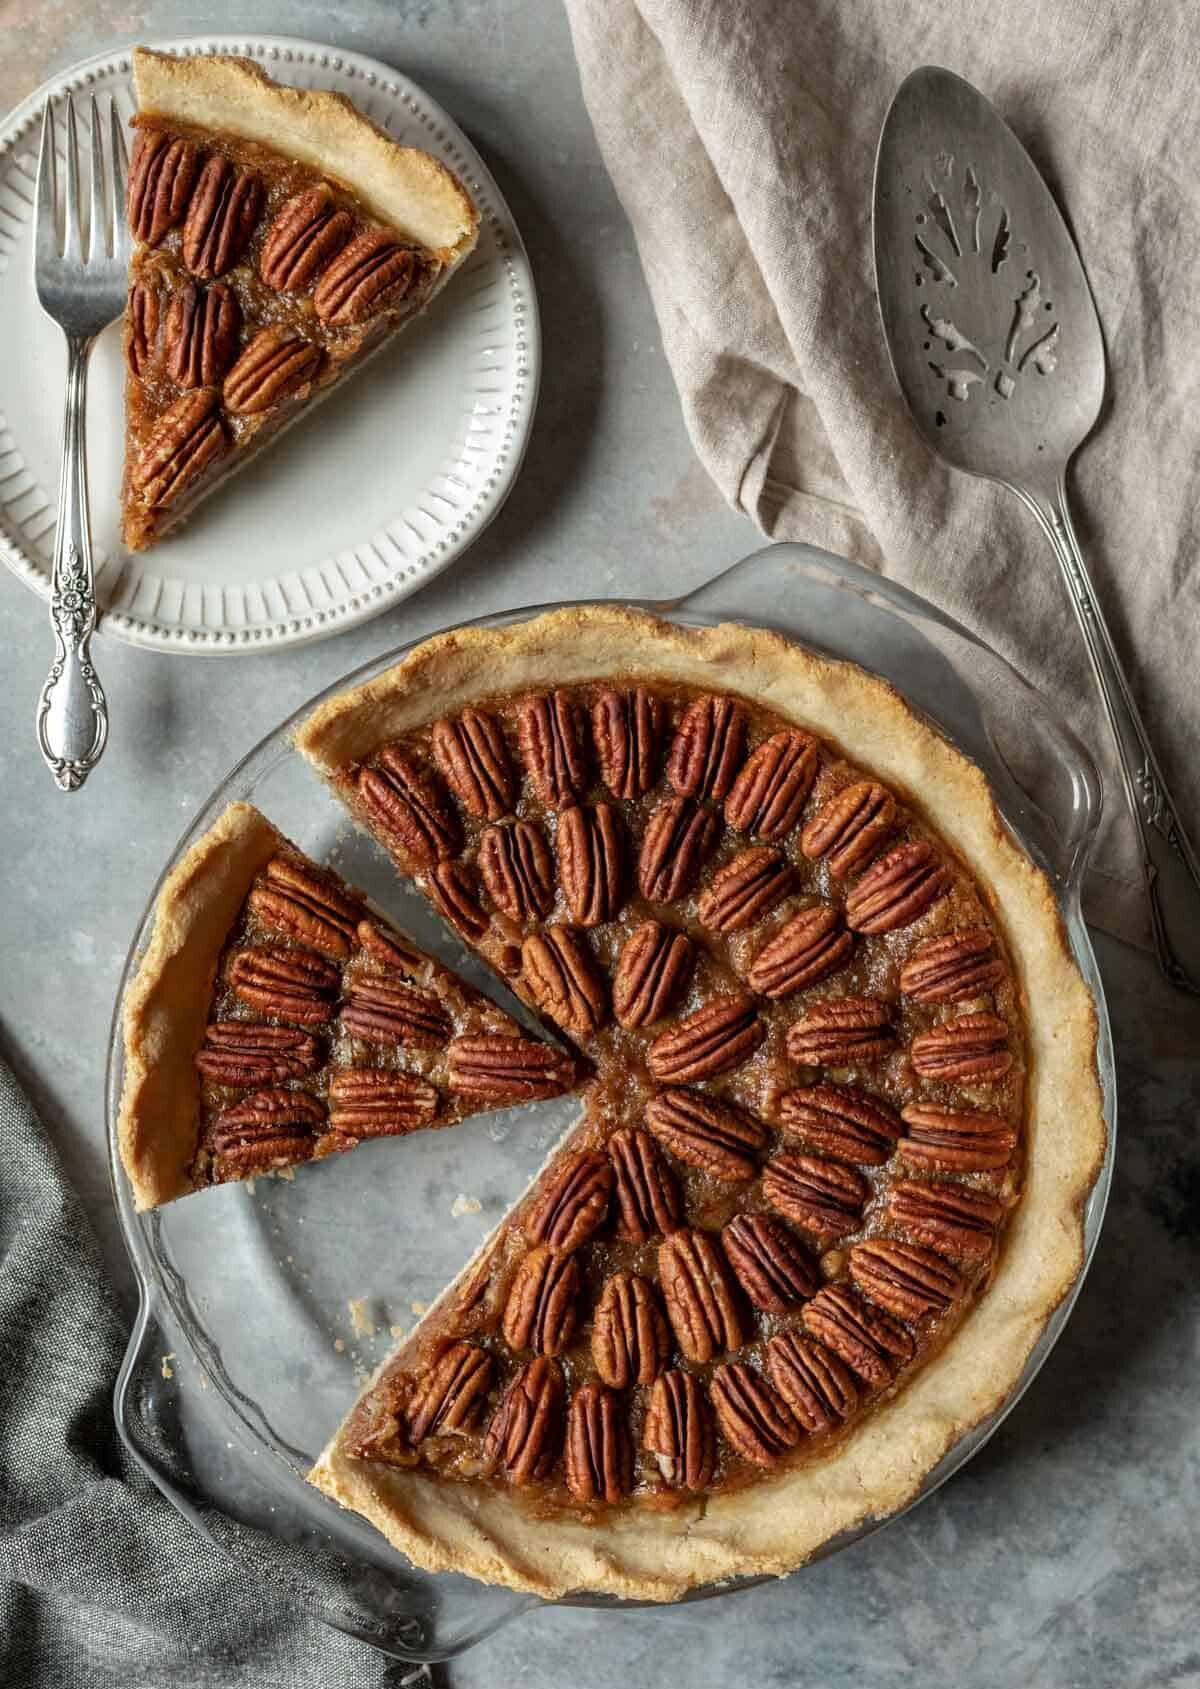 bourbon pecan pie, served on a plate